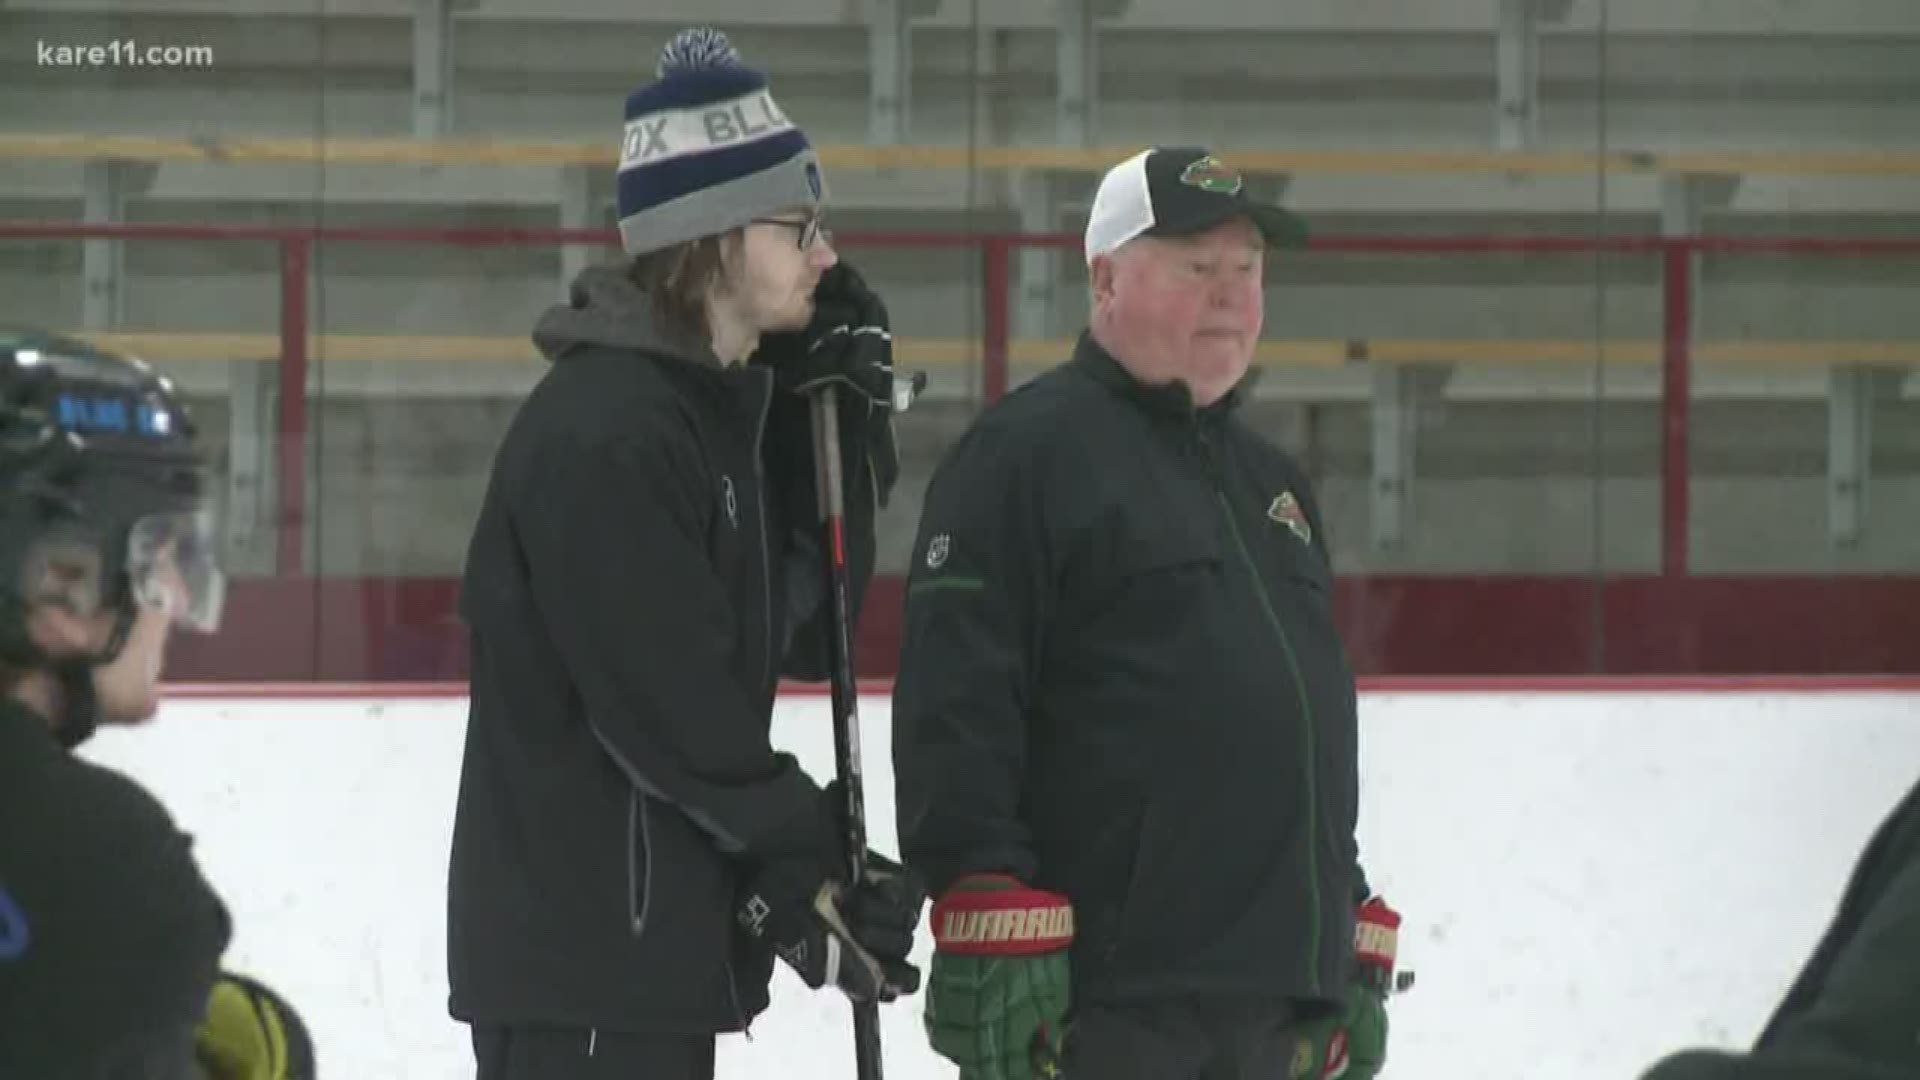 Boudreau helped found the Minnesota Blue Ox program and now his son his helping guiding them on the ice this season.